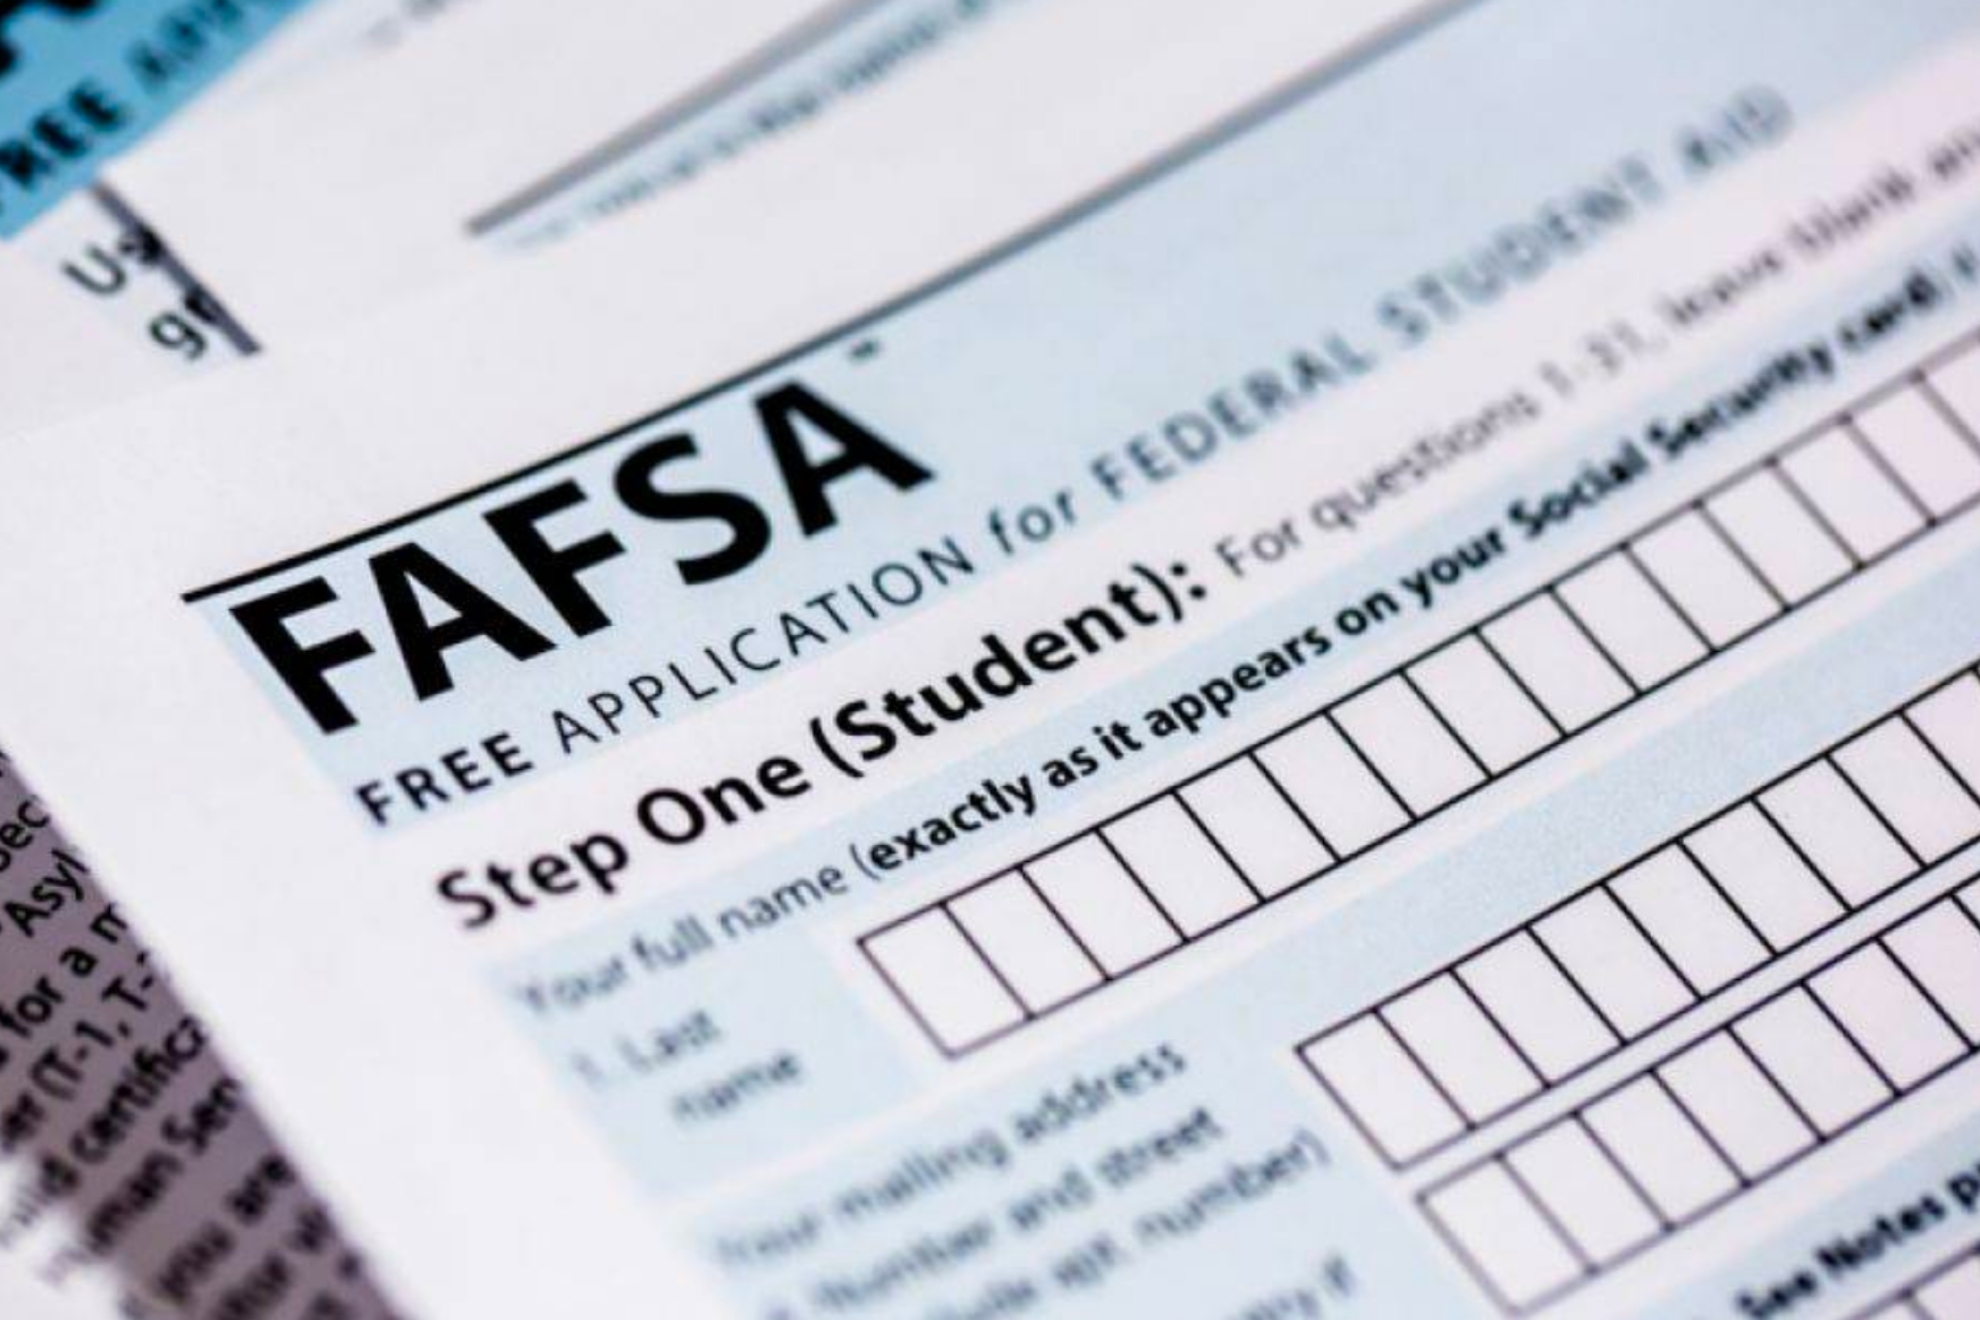 Apply now for Federal Student Loan Debt Relief through FAFSA loan forgiveness